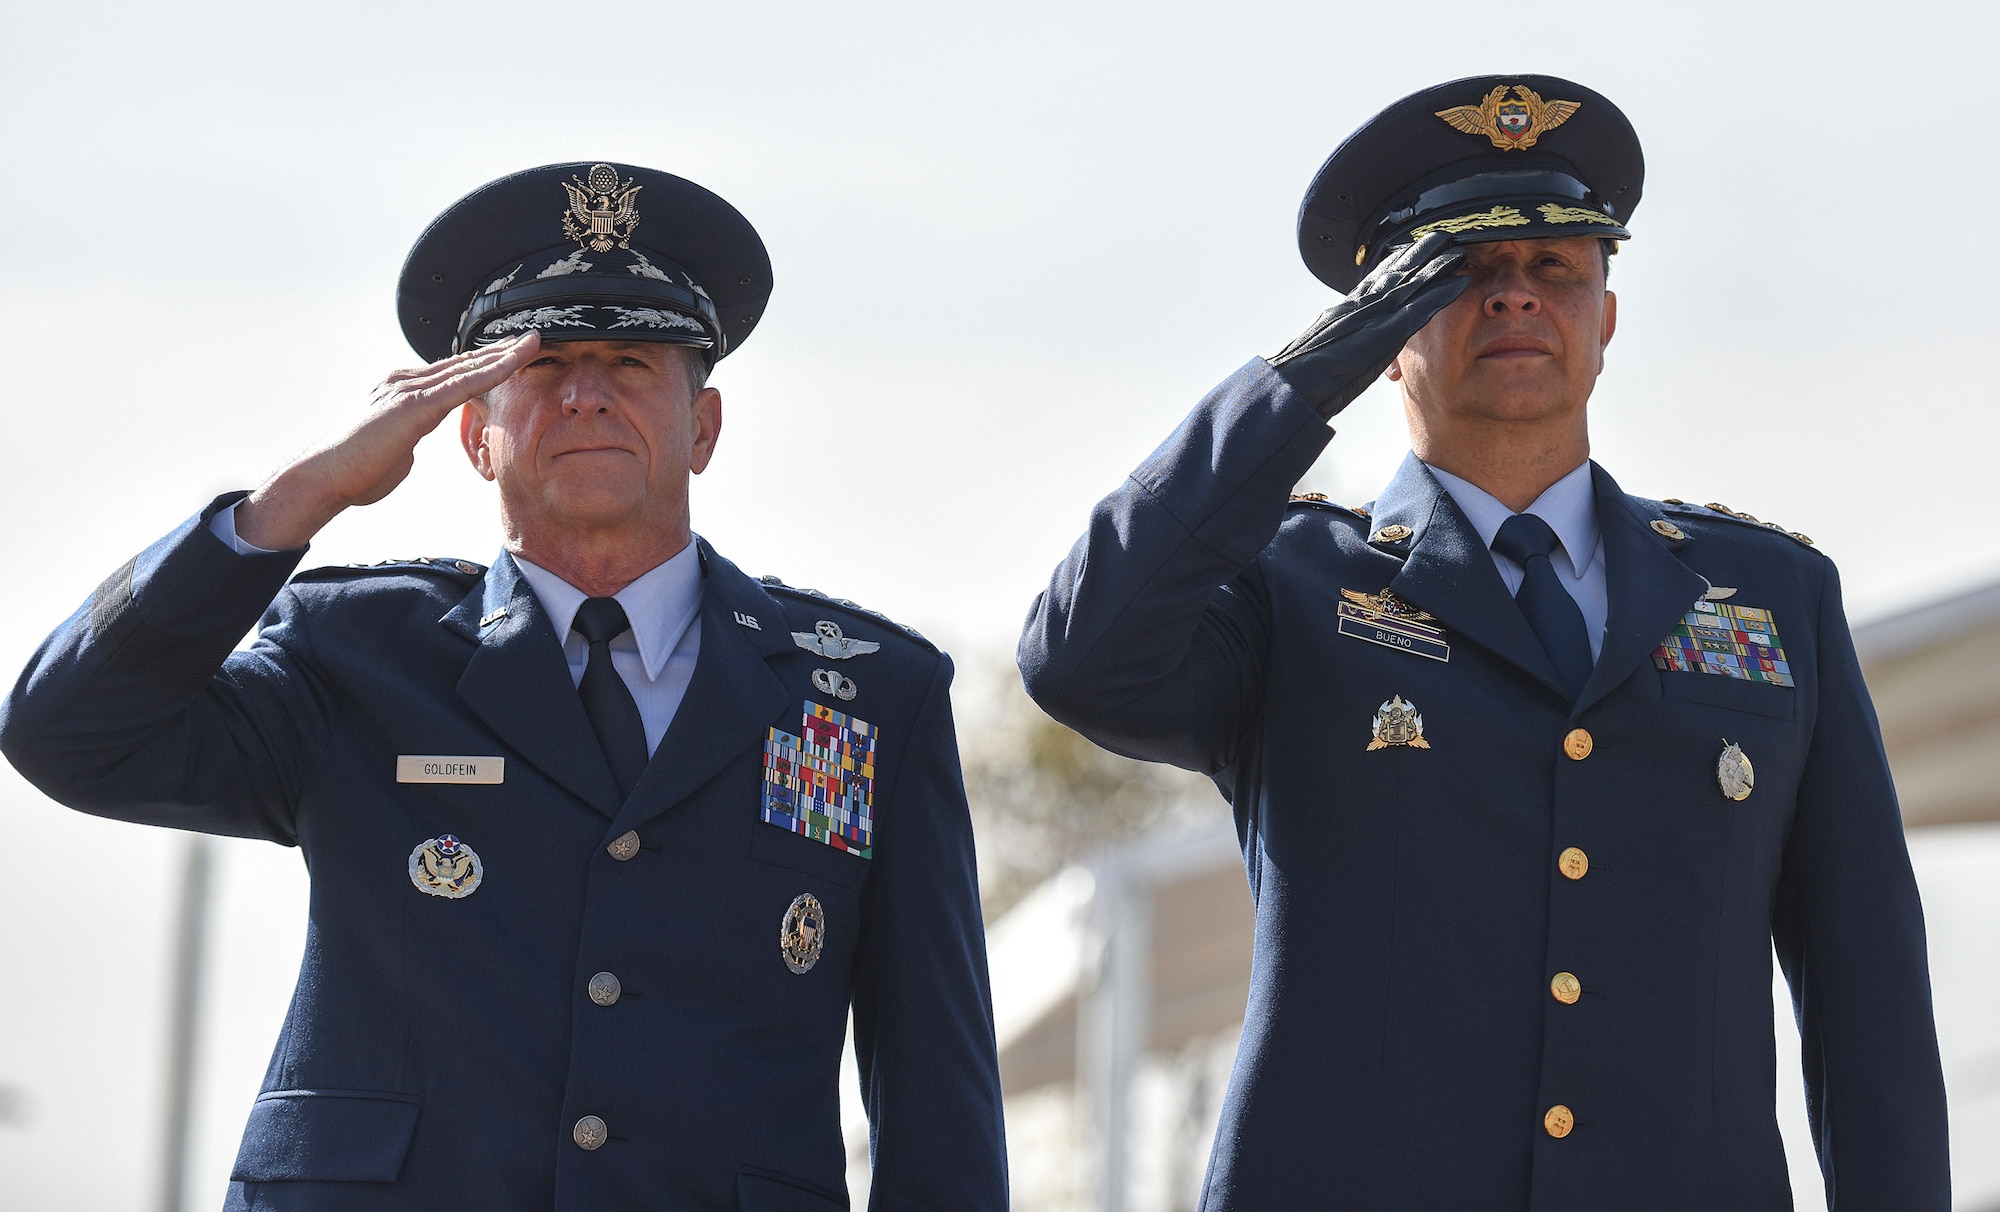 Air Force Chief of Staff Gen. David L. Goldfein and Commander of the Colombian Air Force General Carlos Eduardo Bueno Vargas salute during the Memorial Heroes Caidos en Combate in Bogota, Colombia, Nov. 15, 2018. Goldfein's visit to the country and U.S. engagement in the region reflect the enduring promise of friendship, partnership and solidarity between the Americas. (U.S. Air Force photo by Tech Sgt. Anthony Nelson Jr.)